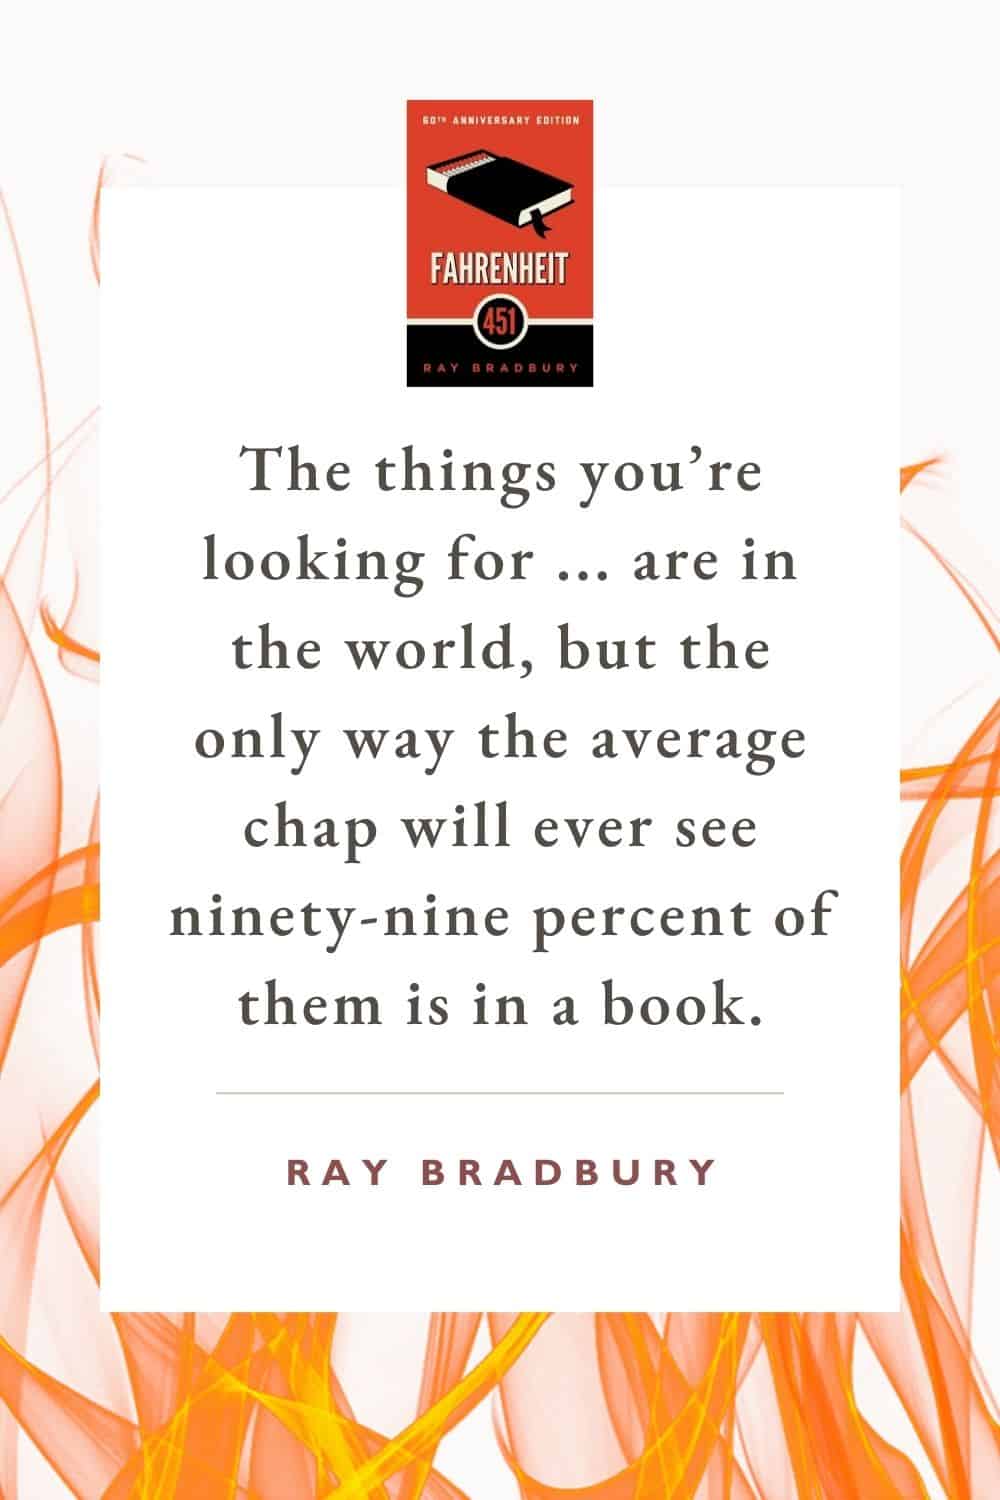 The things you’re looking for, Montag, are in the world, but the only way the average chap will ever see ninety-nine percent of them is in a book.